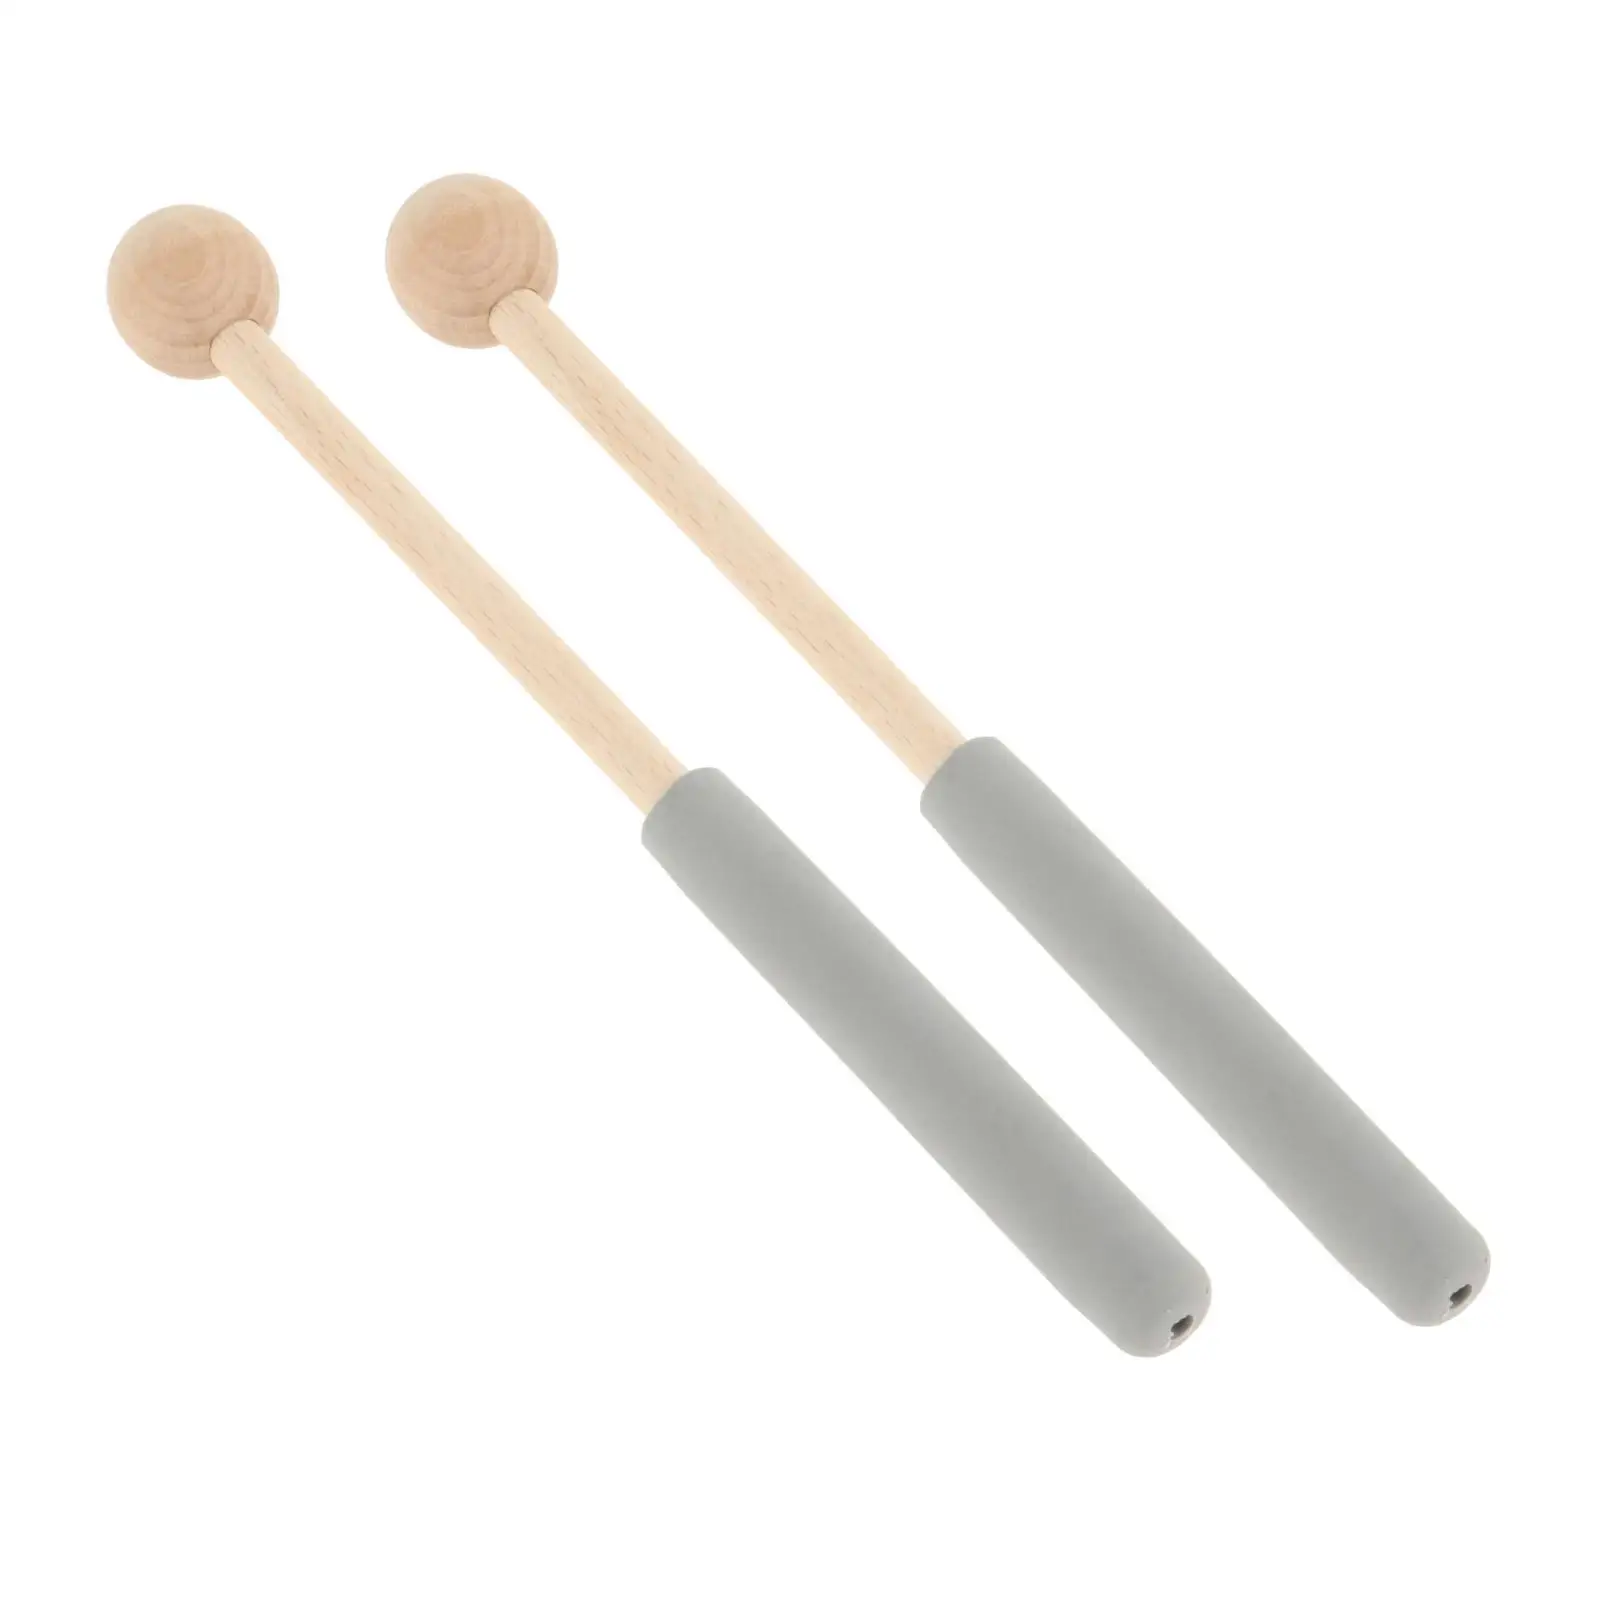 Marimba Mallets Drumsticks Xylophone Lotus Drum 1 Pair Percussion Bell Toddler